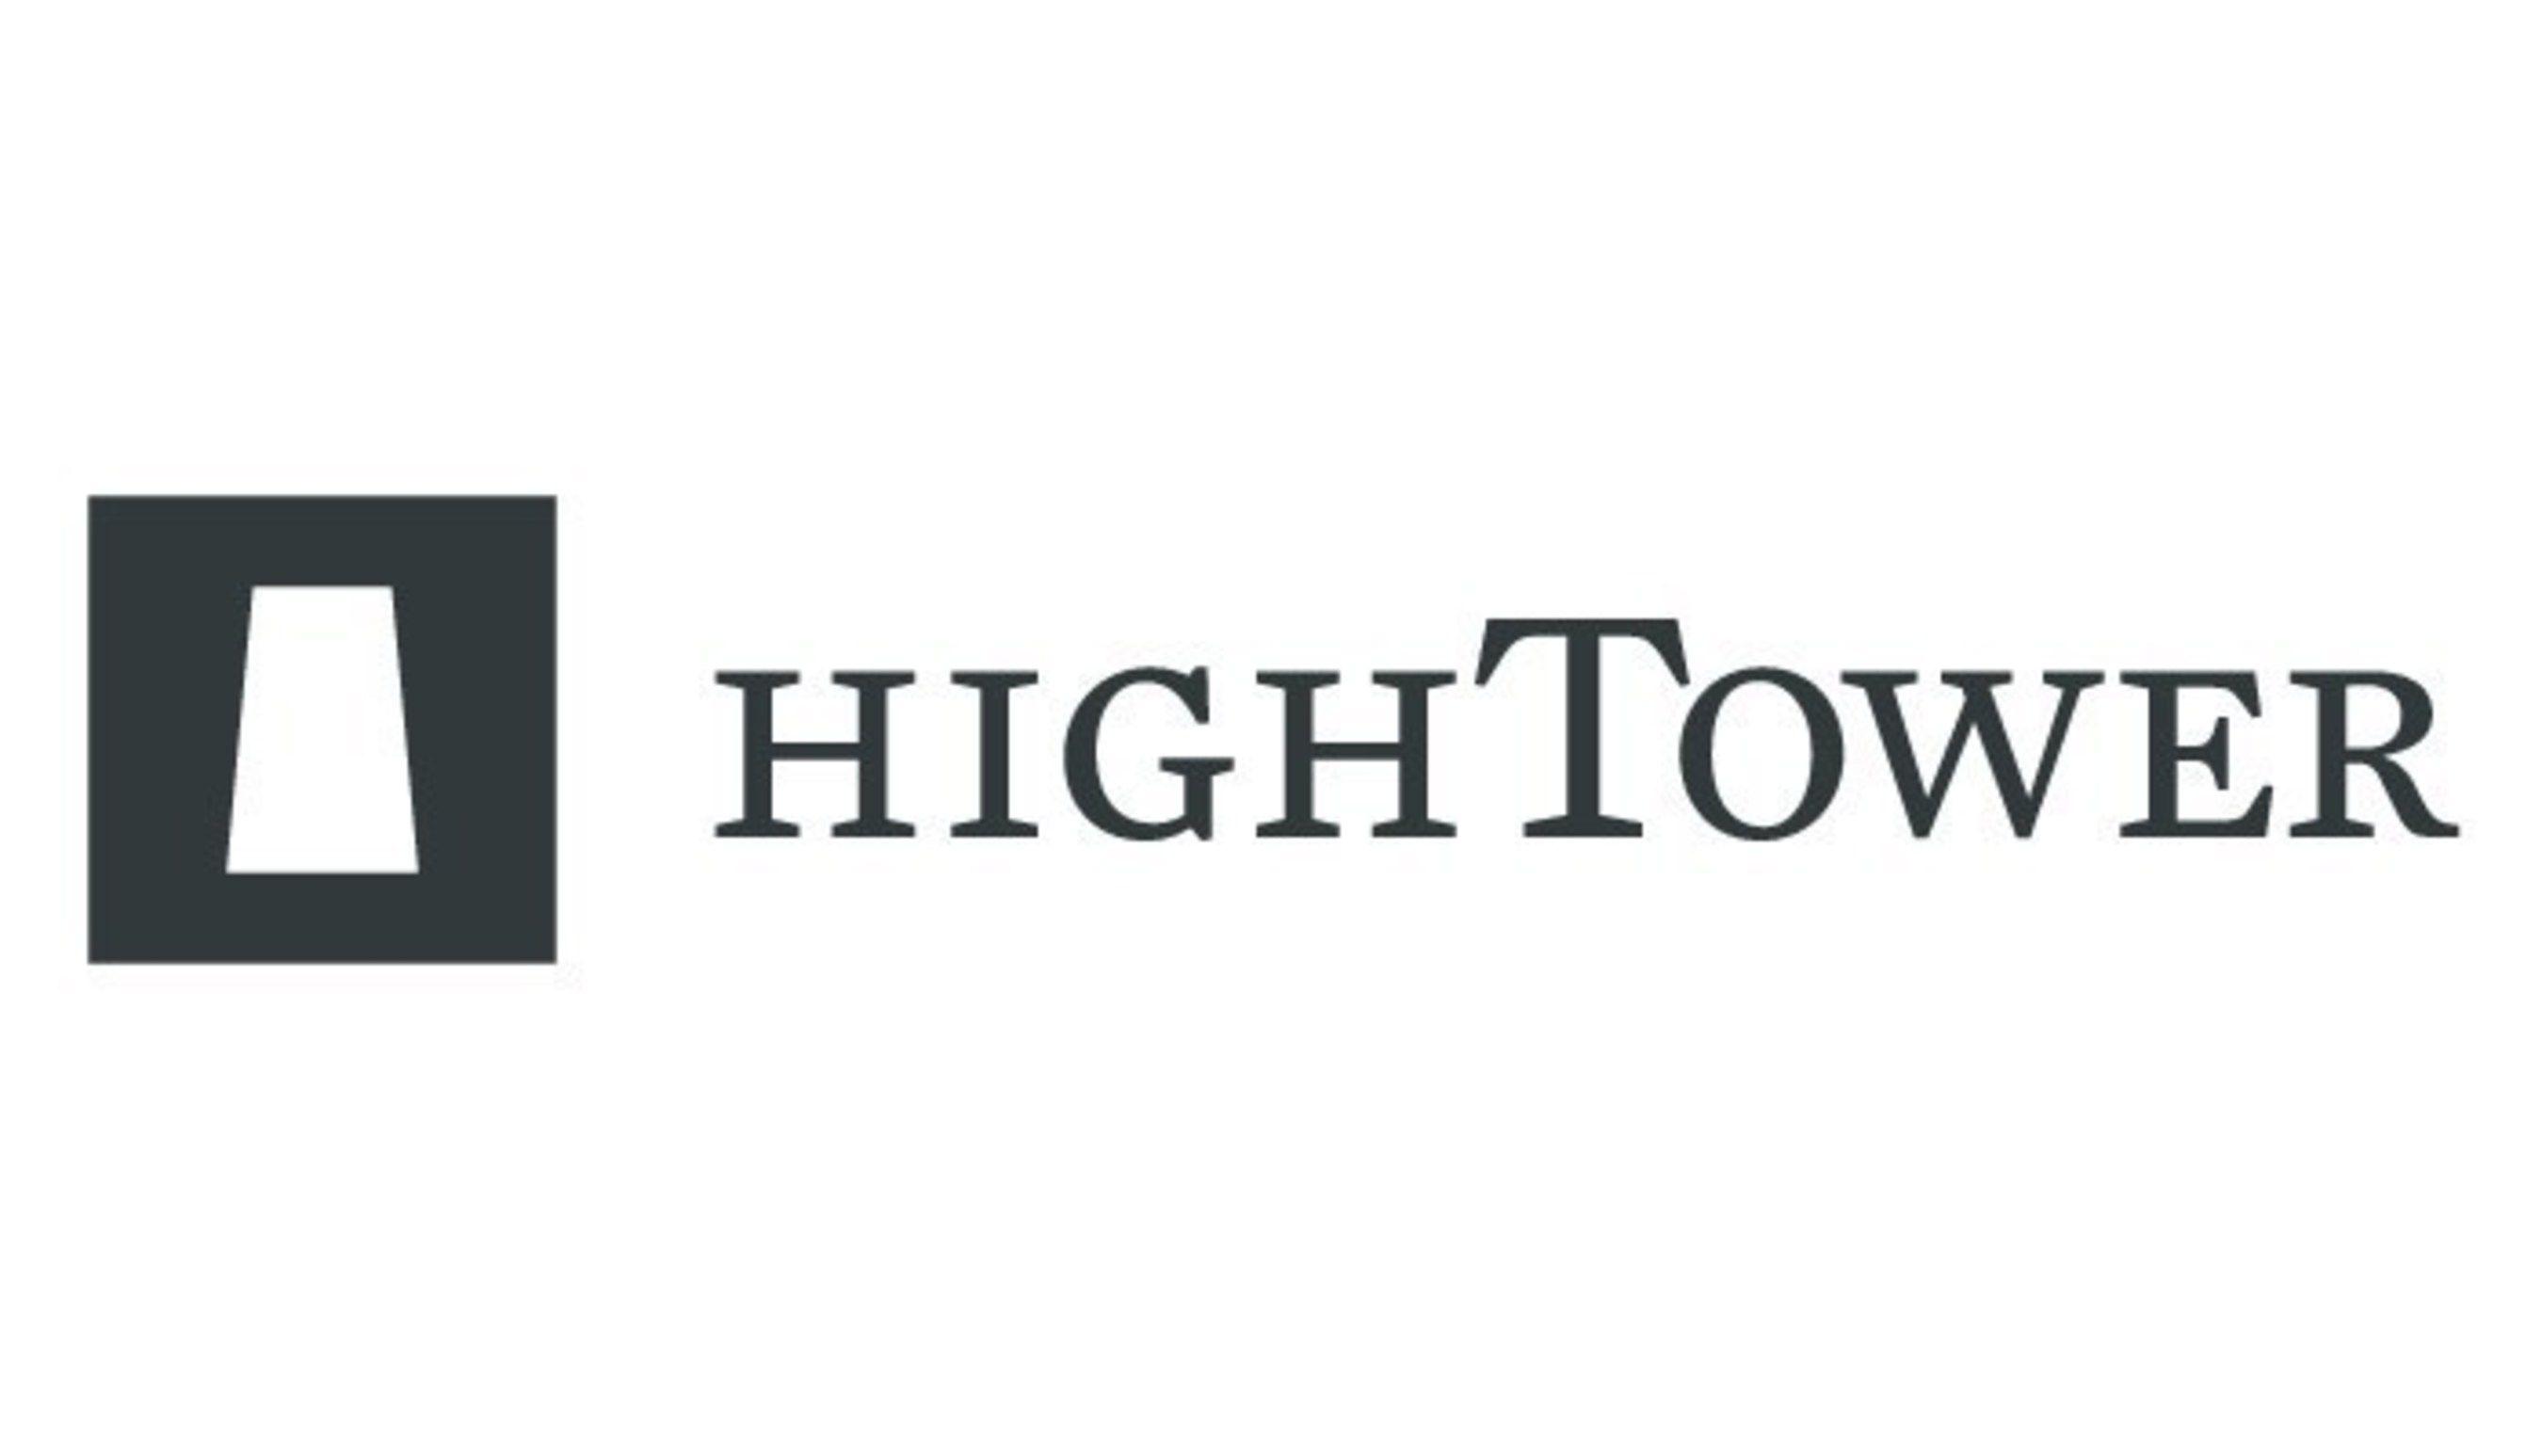 Hightower Logo - HighTower to Acquire WealthTrust from Lee Equity Partners, Adding ...